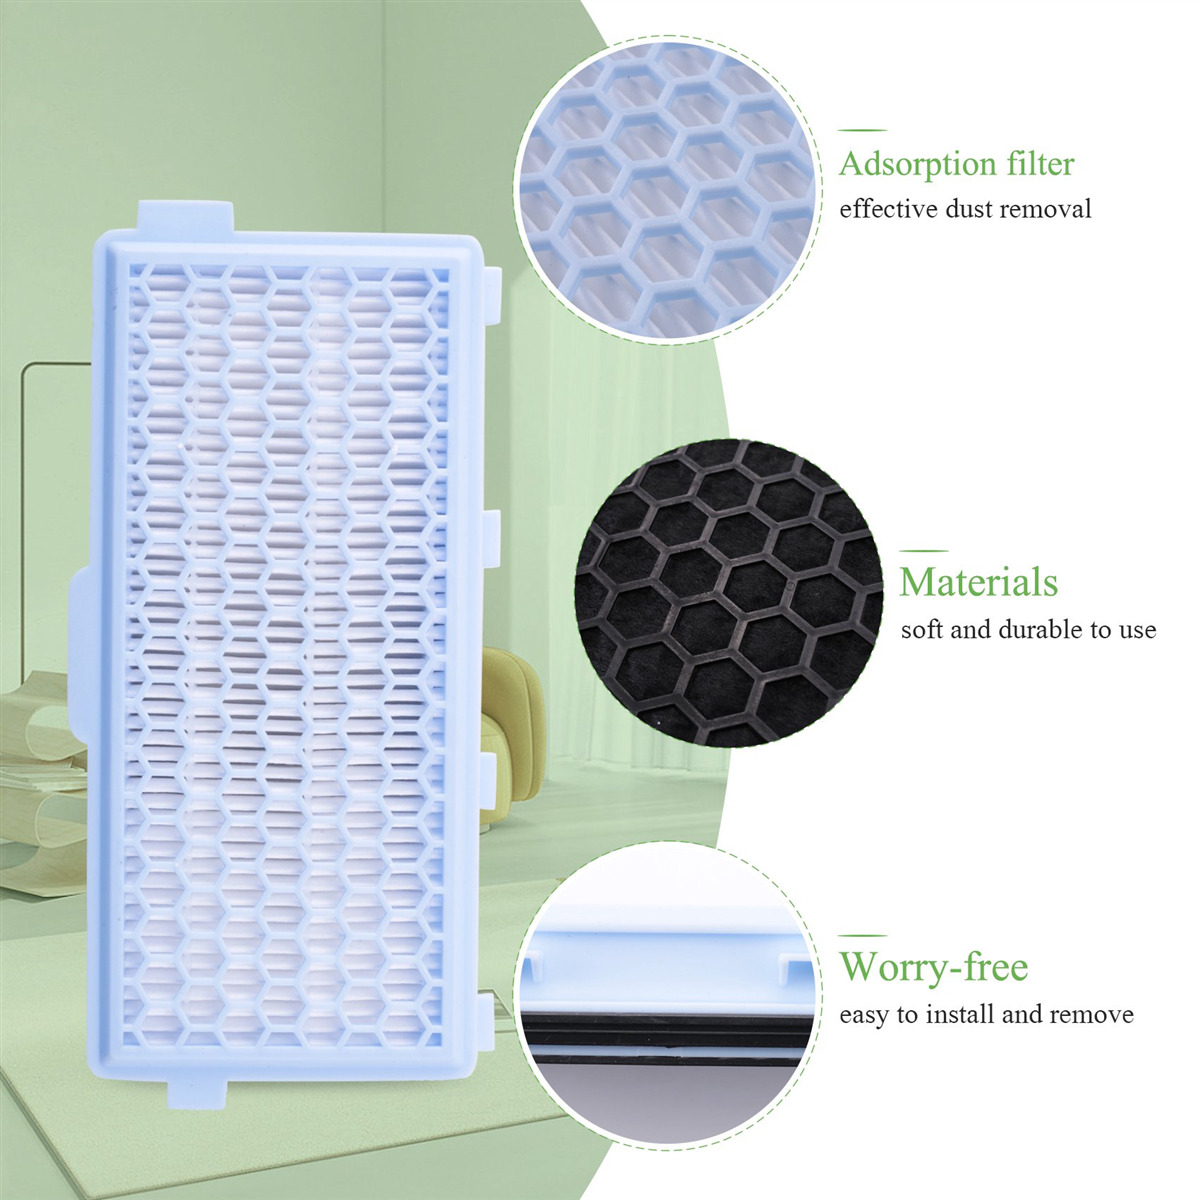 Replacement for -HA 50 HEPA Air Clean Filters for S4, S5, S6, S8, S4000, S5000,Vacuum Cleaner Accessories